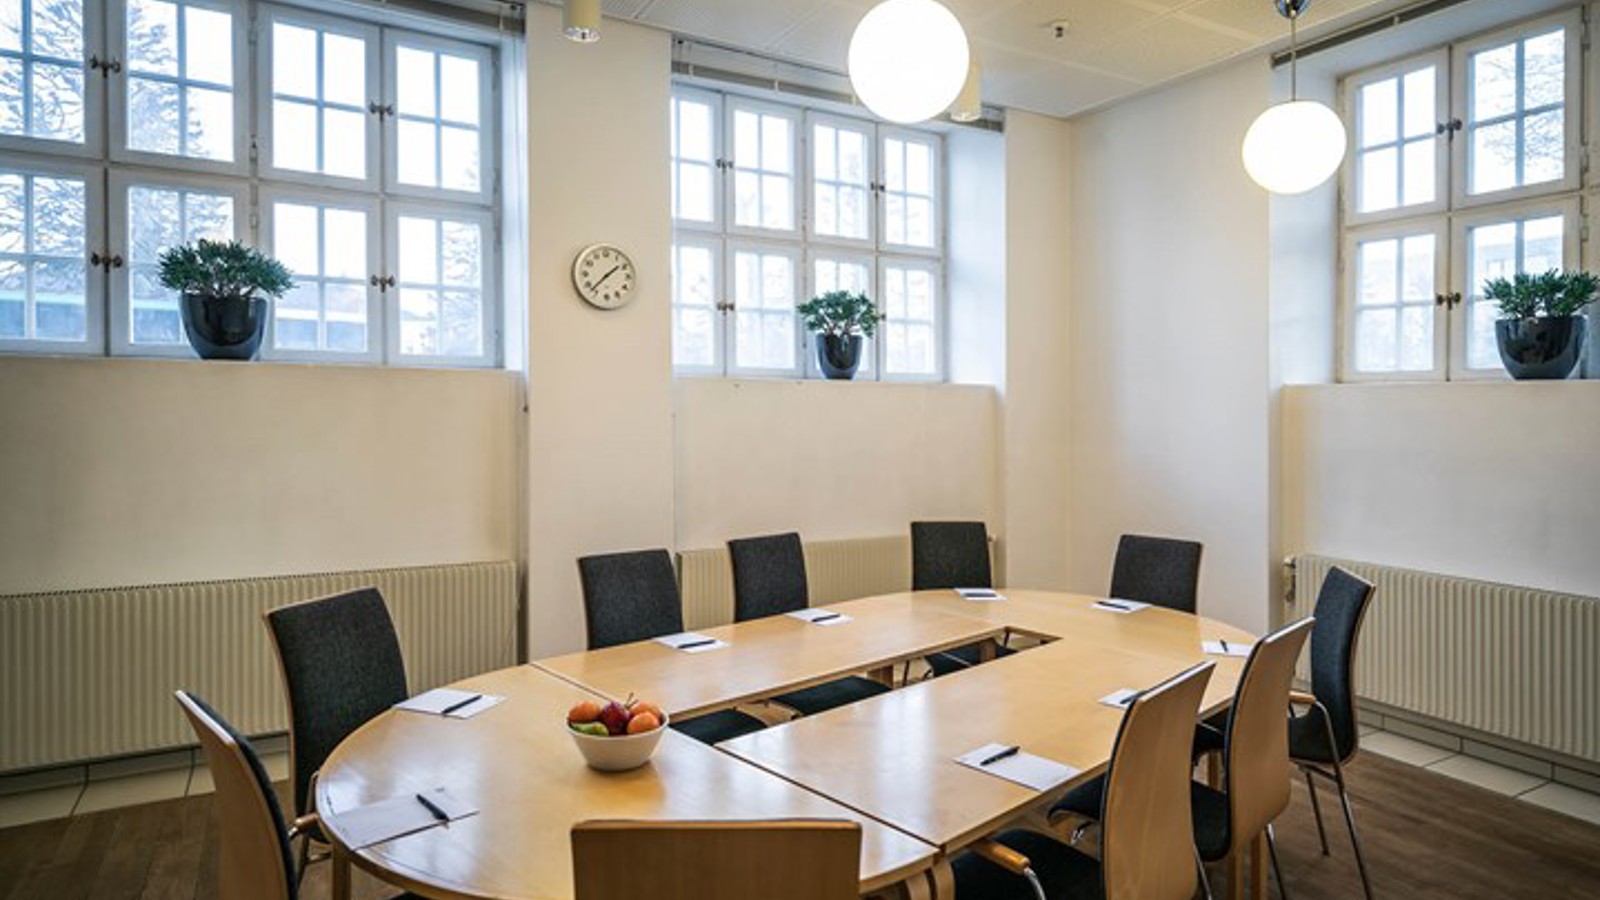 Conference room with board seating and large windows